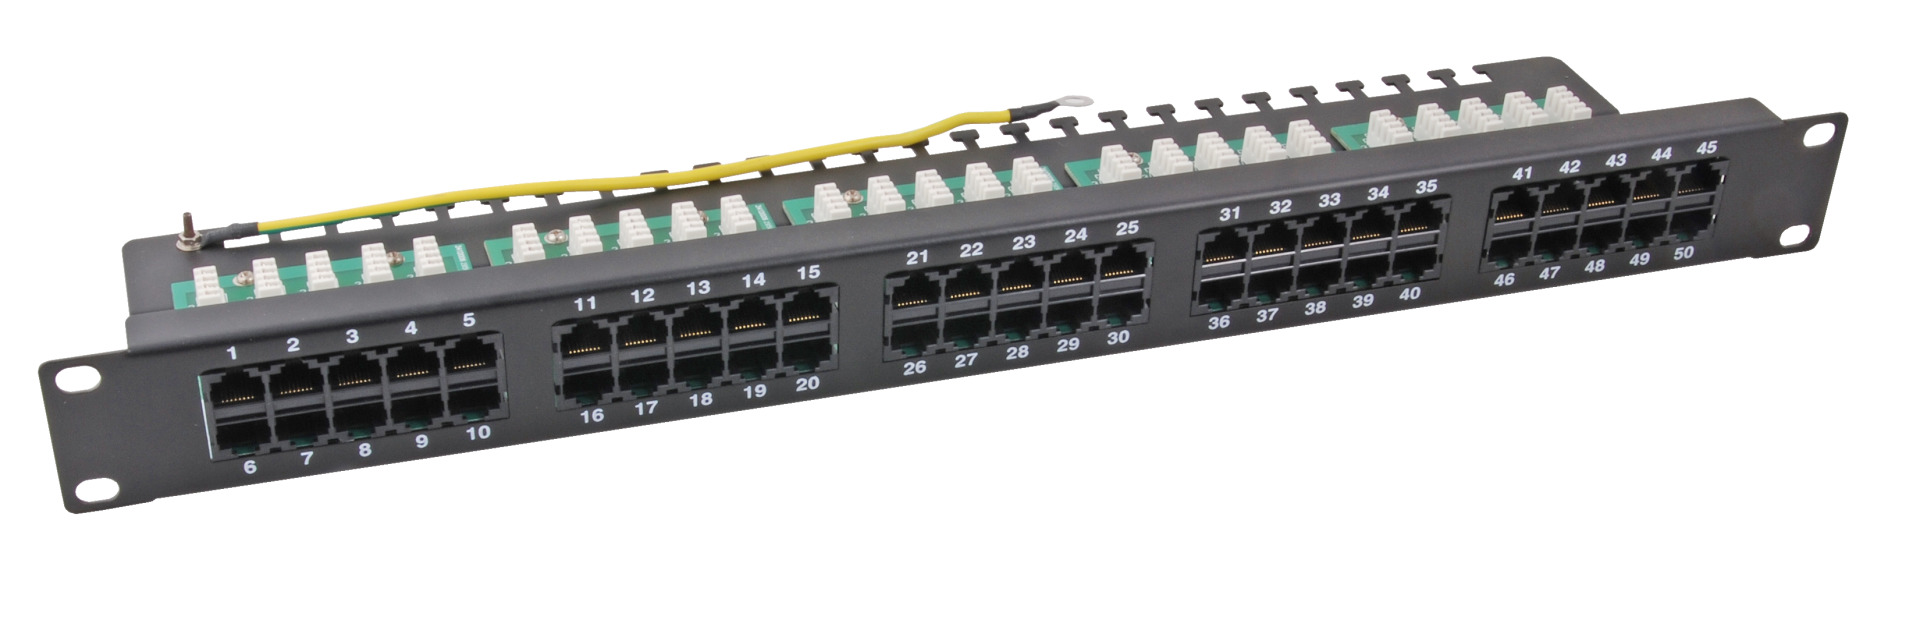 Patchpanel 50xRJ45 8/4 1HE ISDN, RAL9005, Cat. 3